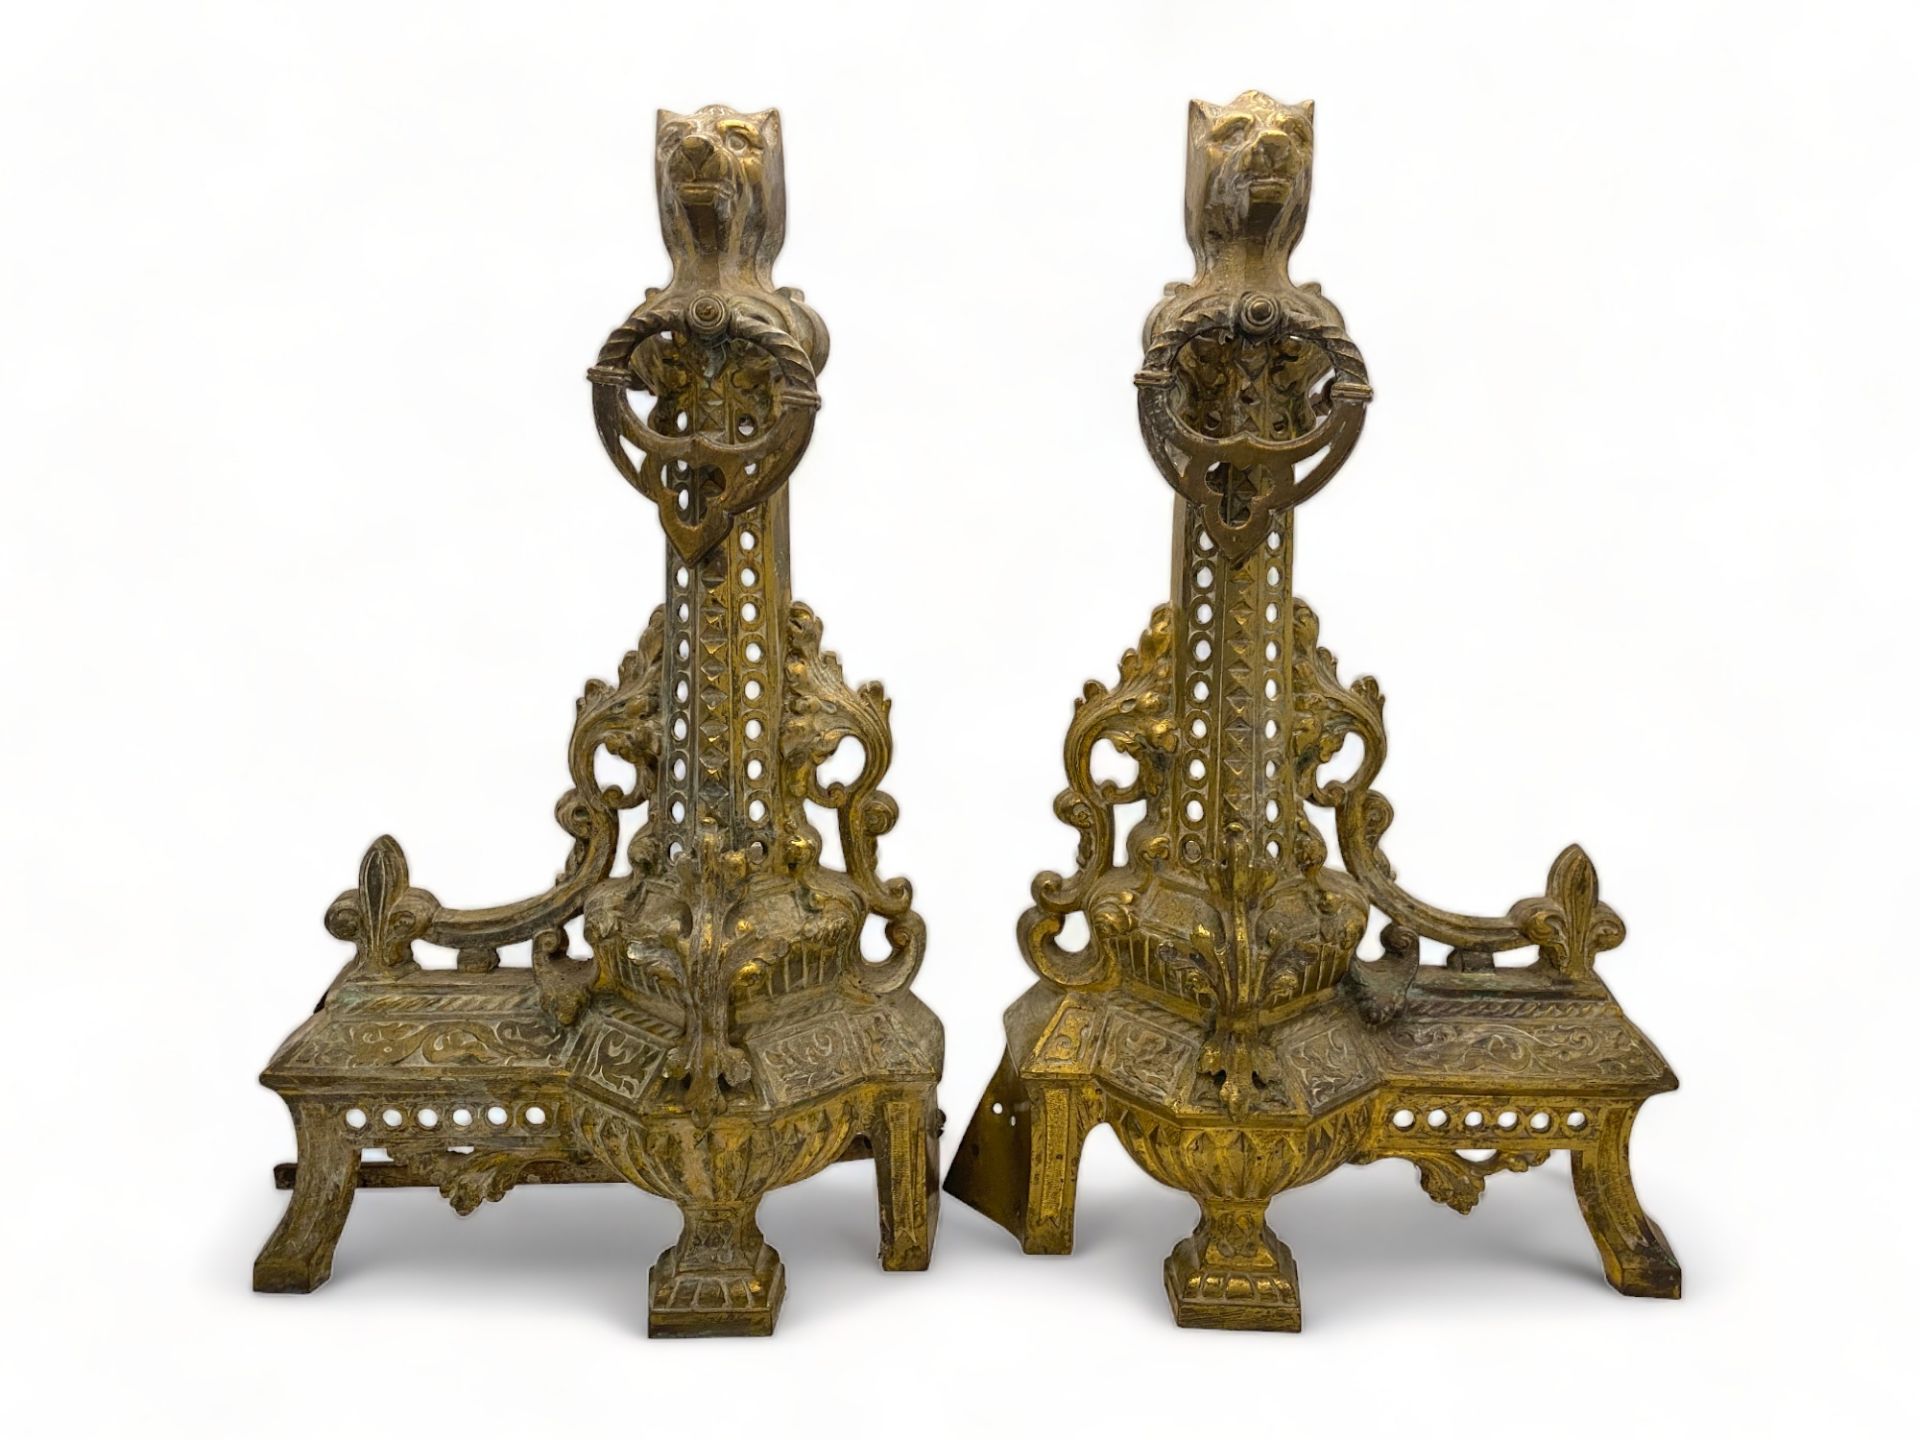 A pair of 19th century French gilt bronze chenets or firedogs